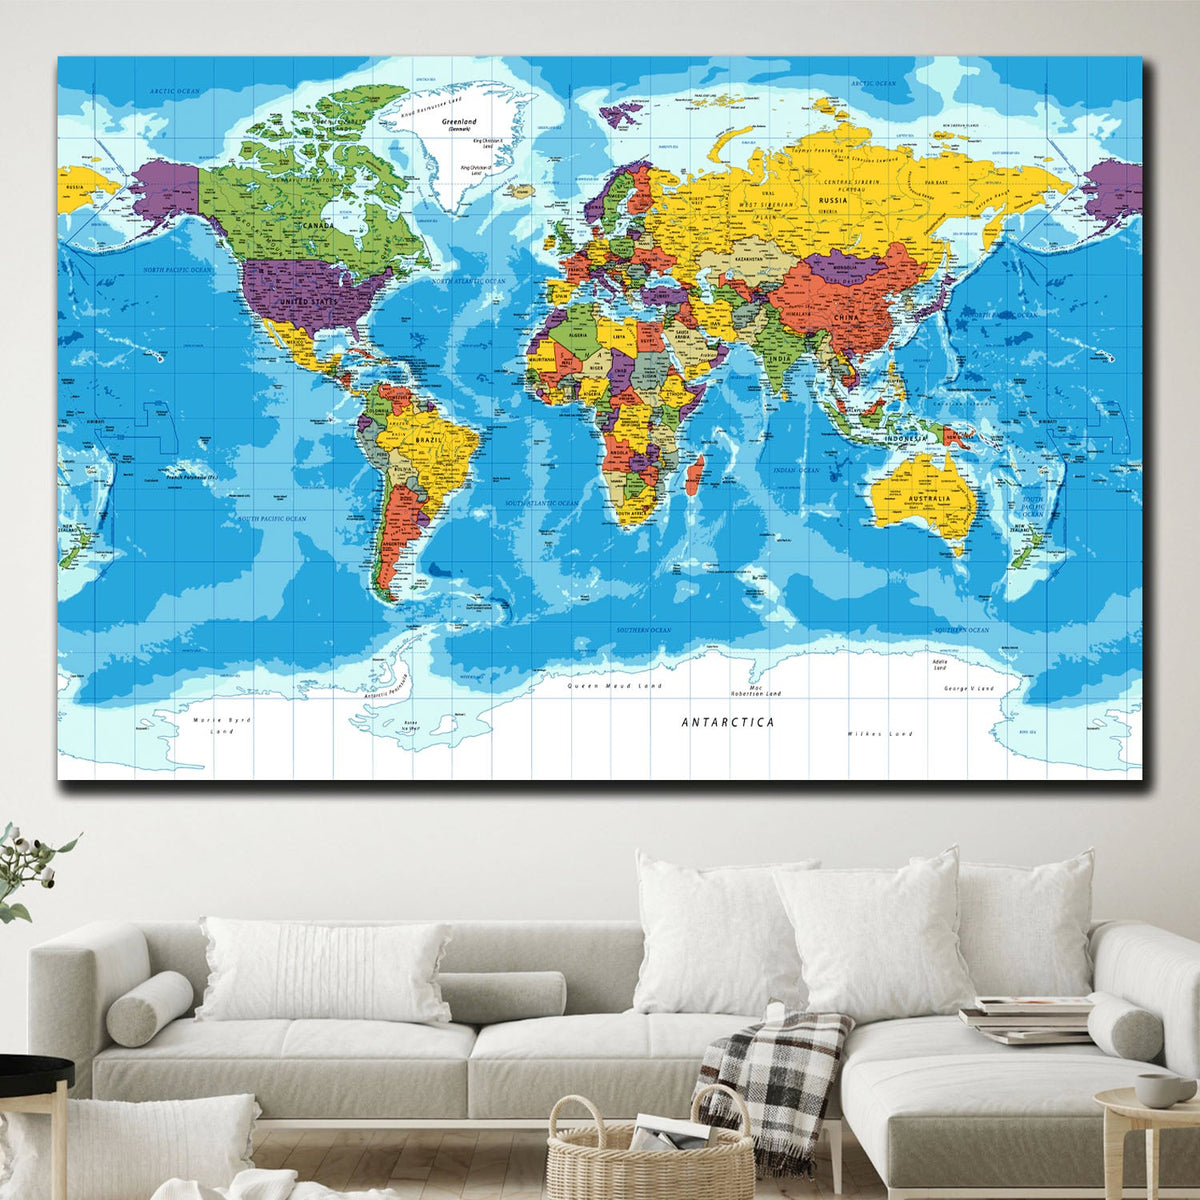 https://cdn.shopify.com/s/files/1/0387/9986/8044/products/MapoftheWorldinColourCanvasArtprintStretched-3.jpg